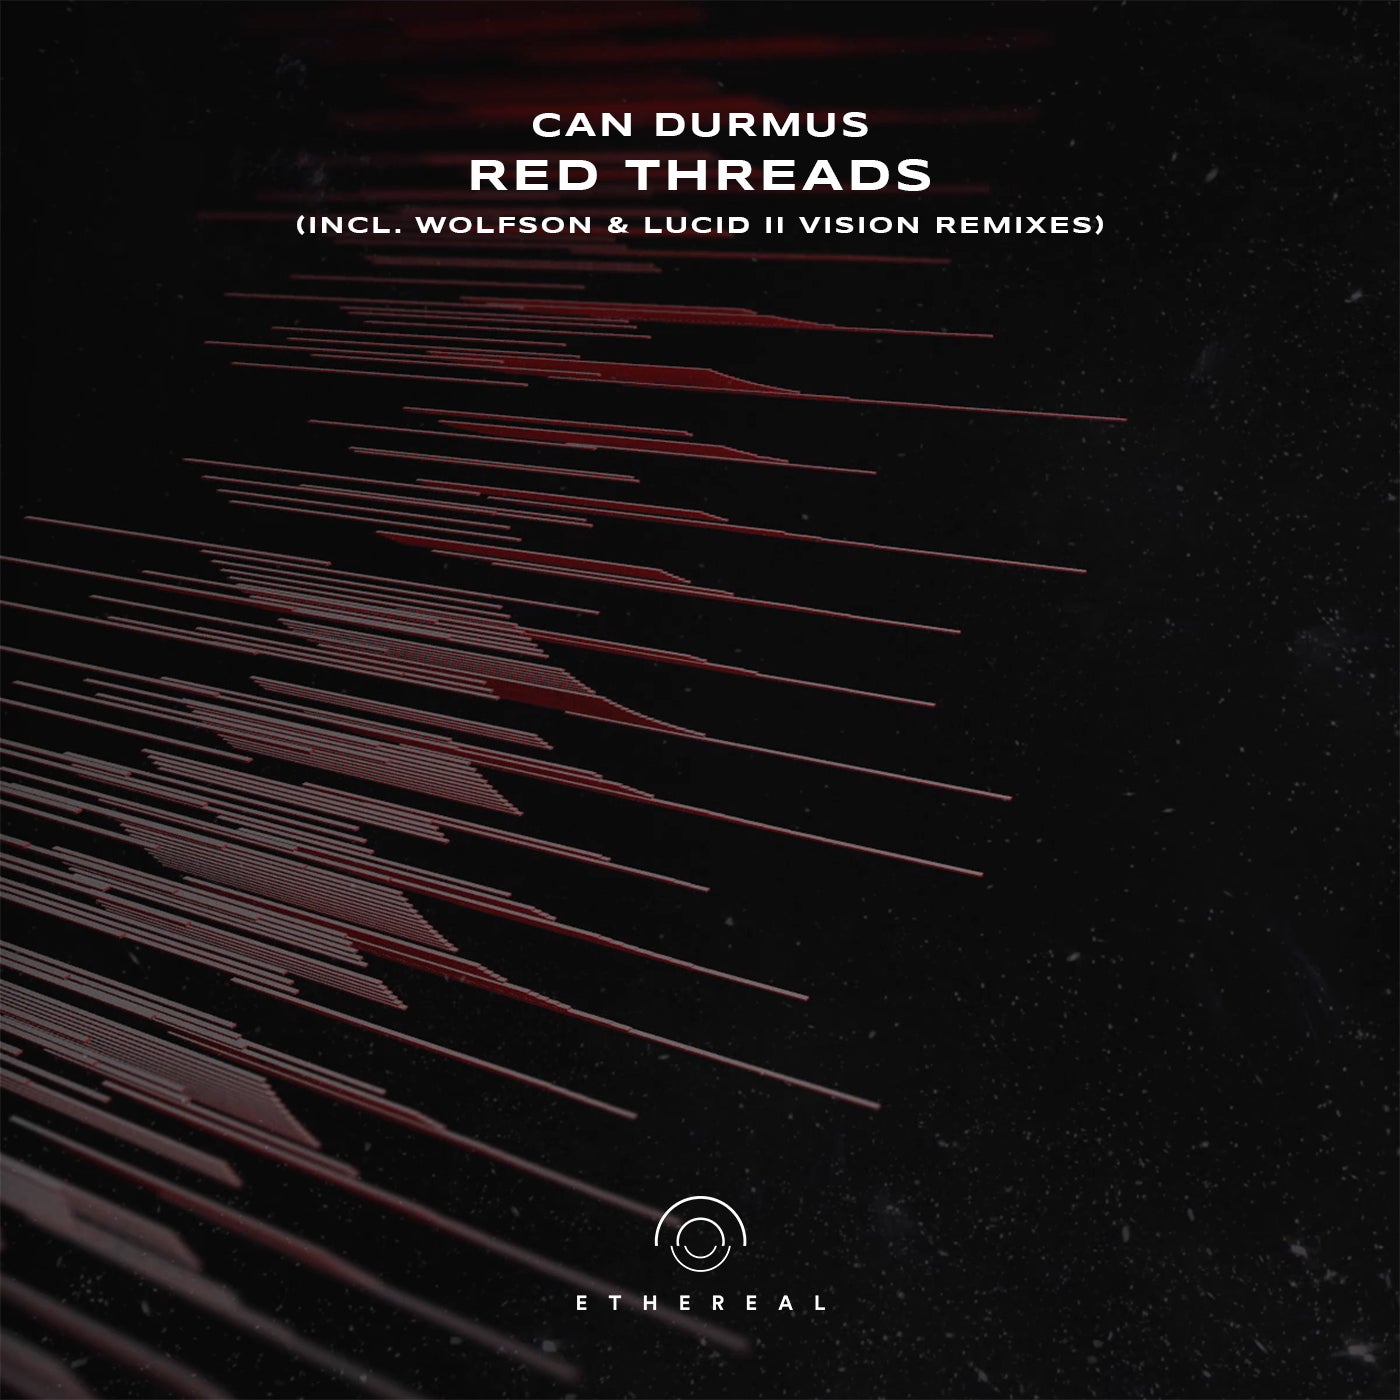 Can Durmus - Red Threads (Incl. Wolfson & Lucid II Vision Remixes) [EFM049]